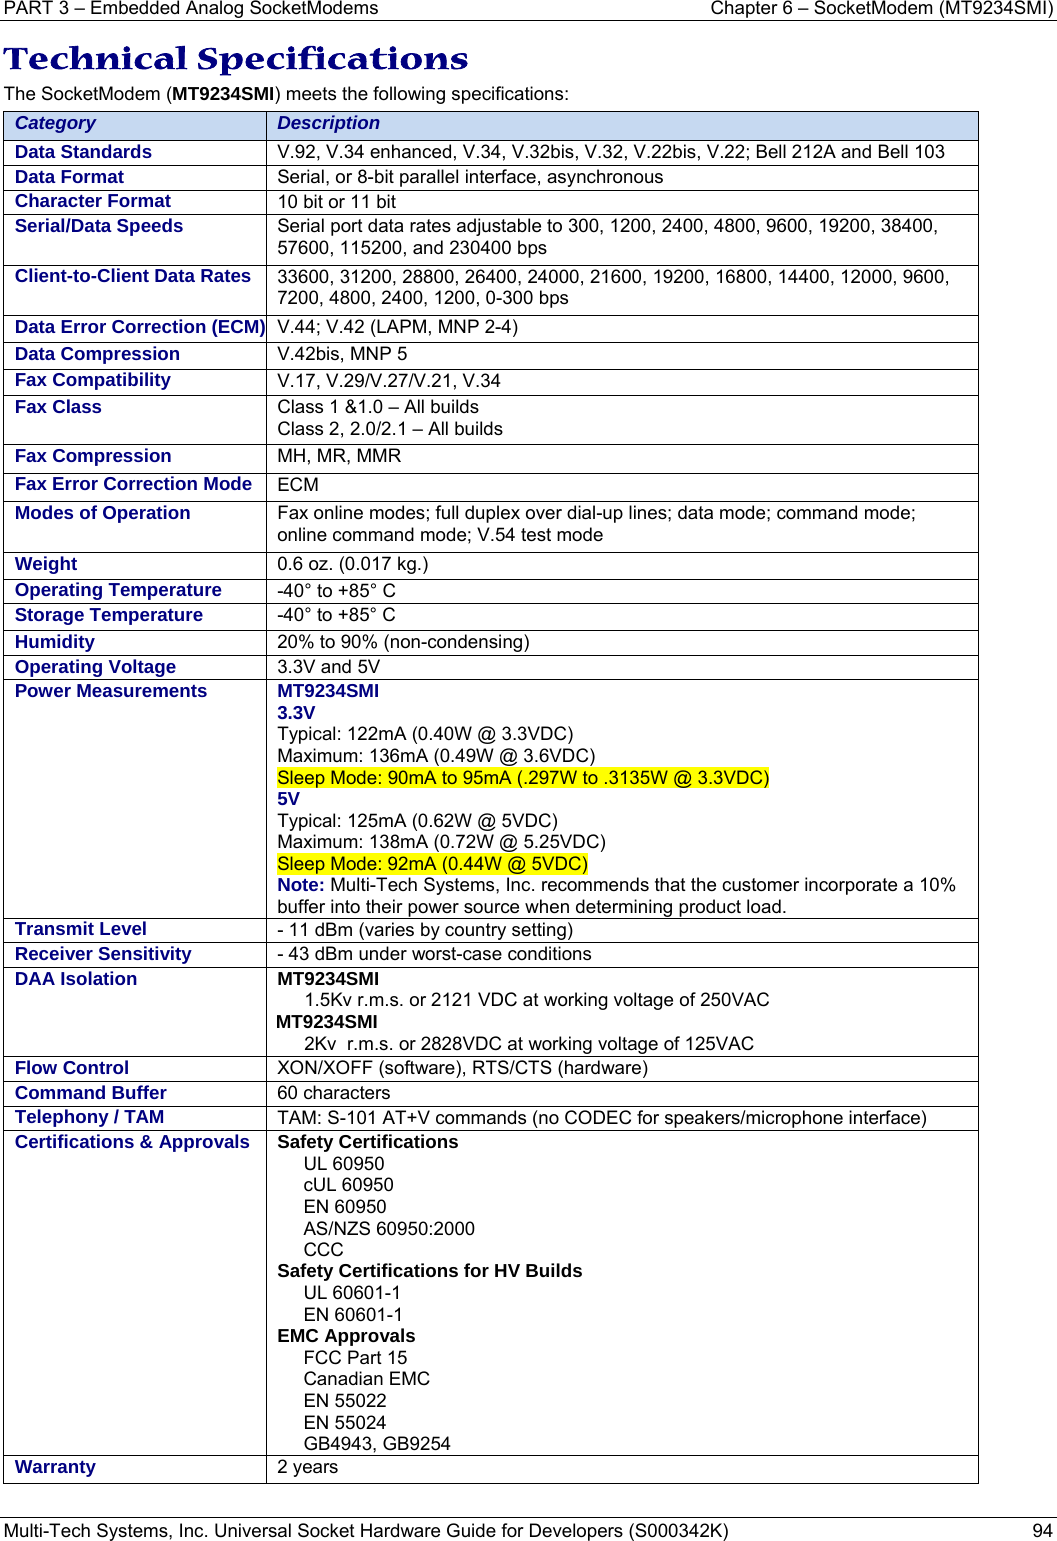 PART 3 – Embedded Analog SocketModems  Chapter 6 – SocketModem (MT9234SMI) Multi-Tech Systems, Inc. Universal Socket Hardware Guide for Developers (S000342K)  94  Technical Specifications  The SocketModem (MT9234SMI) meets the following specifications:  Category  Description Data Standards  V.92, V.34 enhanced, V.34, V.32bis, V.32, V.22bis, V.22; Bell 212A and Bell 103 Data Format  Serial, or 8-bit parallel interface, asynchronous Character Format  10 bit or 11 bit Serial/Data Speeds   Serial port data rates adjustable to 300, 1200, 2400, 4800, 9600, 19200, 38400, 57600, 115200, and 230400 bps Client-to-Client Data Rates  33600, 31200, 28800, 26400, 24000, 21600, 19200, 16800, 14400, 12000, 9600, 7200, 4800, 2400, 1200, 0-300 bps Data Error Correction (ECM) V.44; V.42 (LAPM, MNP 2-4) Data Compression  V.42bis, MNP 5 Fax Compatibility  V.17, V.29/V.27/V.21, V.34  Fax Class  Class 1 &amp;1.0 – All builds Class 2, 2.0/2.1 – All builds Fax Compression  MH, MR, MMR  Fax Error Correction Mode  ECM Modes of Operation  Fax online modes; full duplex over dial-up lines; data mode; command mode; online command mode; V.54 test mode Weight  0.6 oz. (0.017 kg.)  Operating Temperature   -40° to +85° C   Storage Temperature  -40° to +85° C    Humidity  20% to 90% (non-condensing)  Operating Voltage  3.3V and 5V Power Measurements   MT9234SMI 3.3V  Typical: 122mA (0.40W @ 3.3VDC)  Maximum: 136mA (0.49W @ 3.6VDC) Sleep Mode: 90mA to 95mA (.297W to .3135W @ 3.3VDC) 5V Typical: 125mA (0.62W @ 5VDC) Maximum: 138mA (0.72W @ 5.25VDC)  Sleep Mode: 92mA (0.44W @ 5VDC) Note: Multi-Tech Systems, Inc. recommends that the customer incorporate a 10% buffer into their power source when determining product load. Transmit Level  - 11 dBm (varies by country setting) Receiver Sensitivity  - 43 dBm under worst-case conditions DAA Isolation   MT9234SMI  1.5Kv r.m.s. or 2121 VDC at working voltage of 250VAC MT9234SMI   2Kv  r.m.s. or 2828VDC at working voltage of 125VAC Flow Control  XON/XOFF (software), RTS/CTS (hardware) Command Buffer 60 characters Telephony / TAM    TAM: S-101 AT+V commands (no CODEC for speakers/microphone interface) Certifications &amp; Approvals  Safety CertificationsUL 60950 cUL 60950 EN 60950 AS/NZS 60950:2000  CCC Safety Certifications for HV Builds UL 60601-1 EN 60601-1 EMC Approvals FCC Part 15  Canadian EMC EN 55022  EN 55024 GB4943, GB9254 Warranty   2 years   